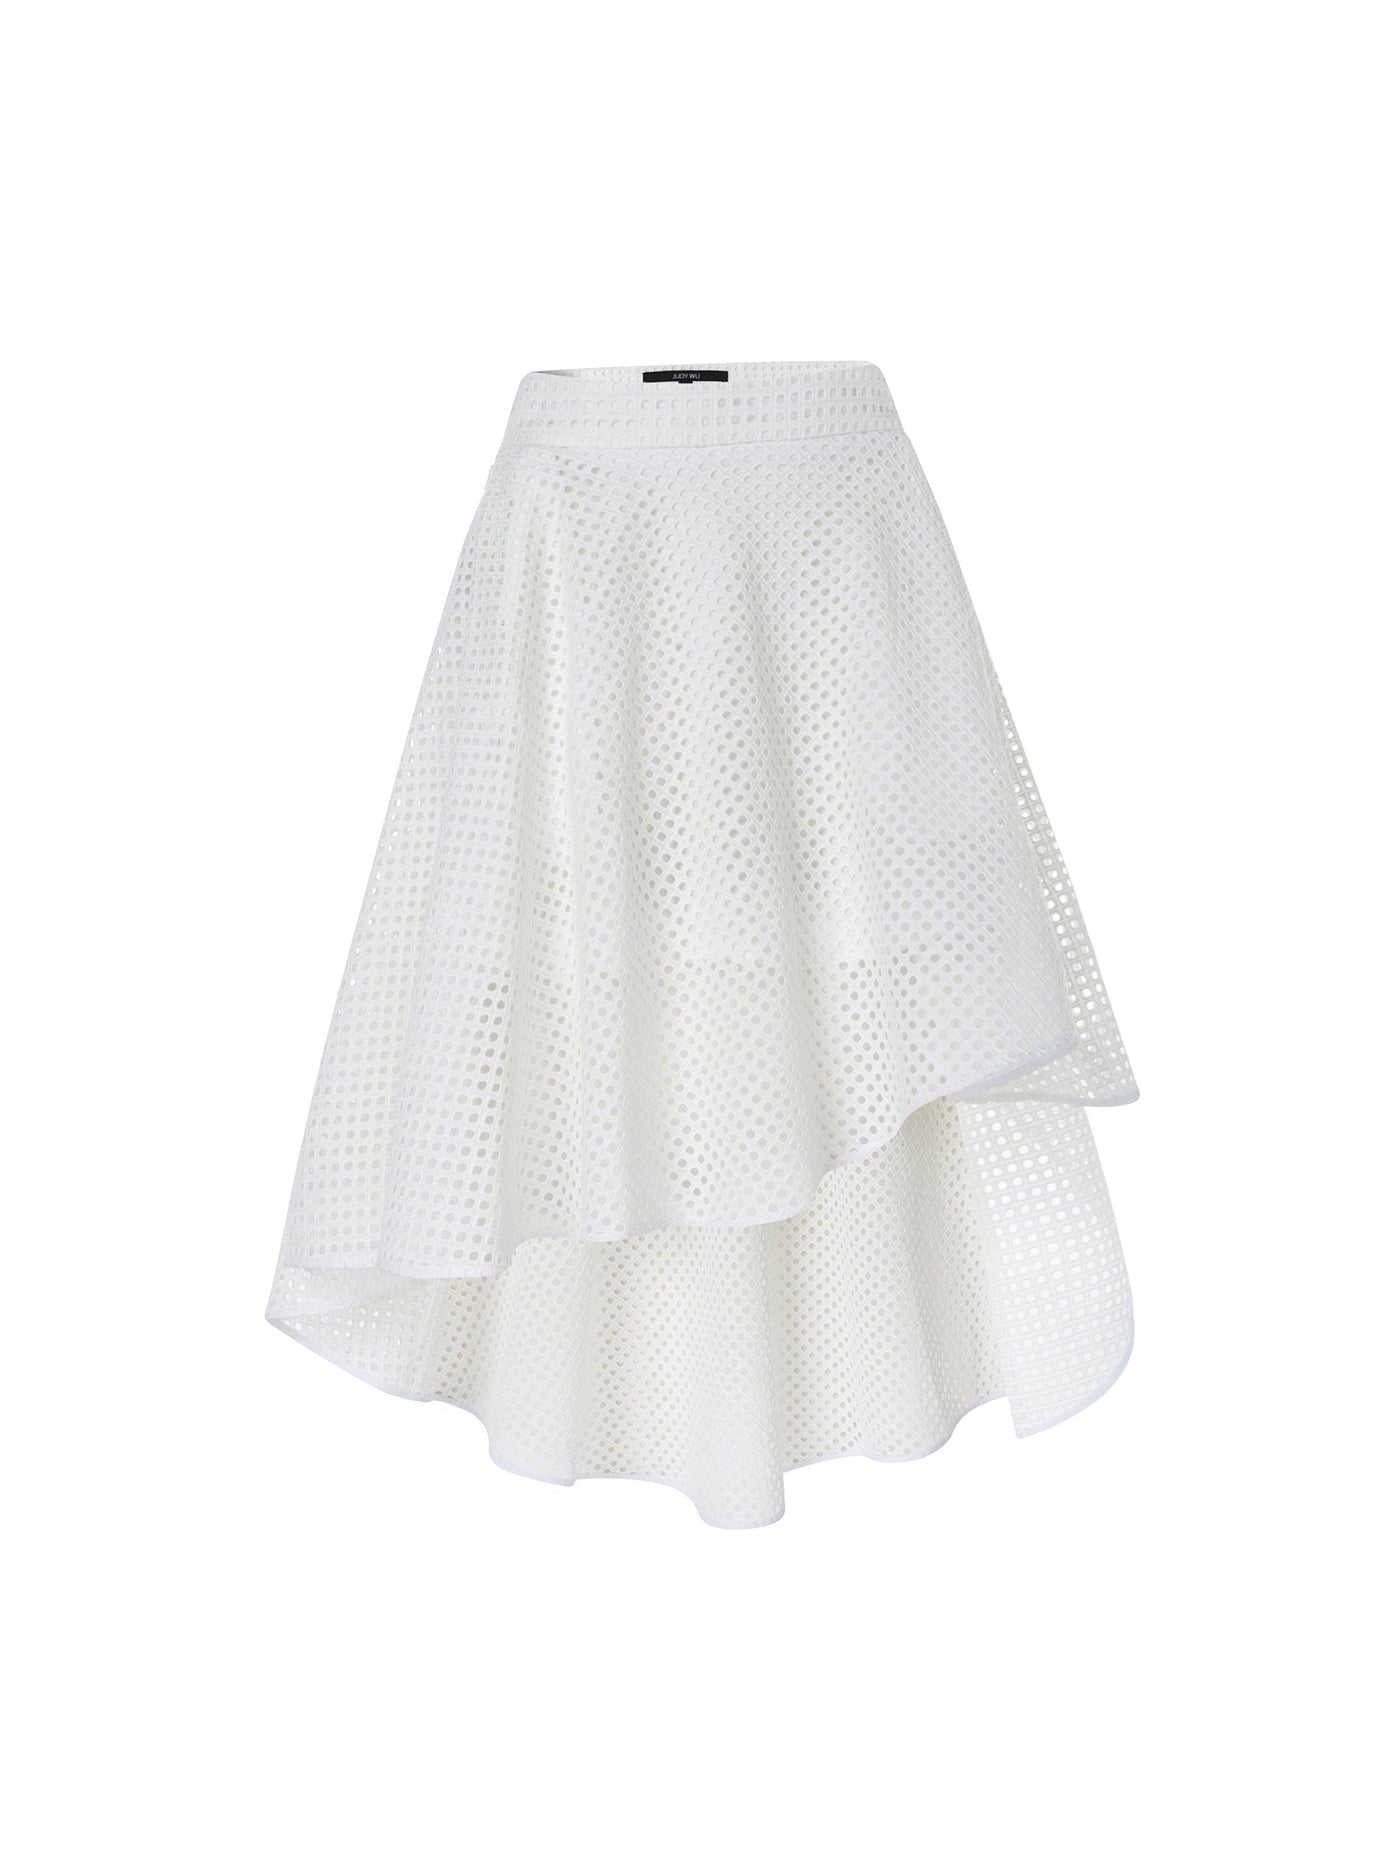 Broderie Anglaise Mini High Low Skirt in White